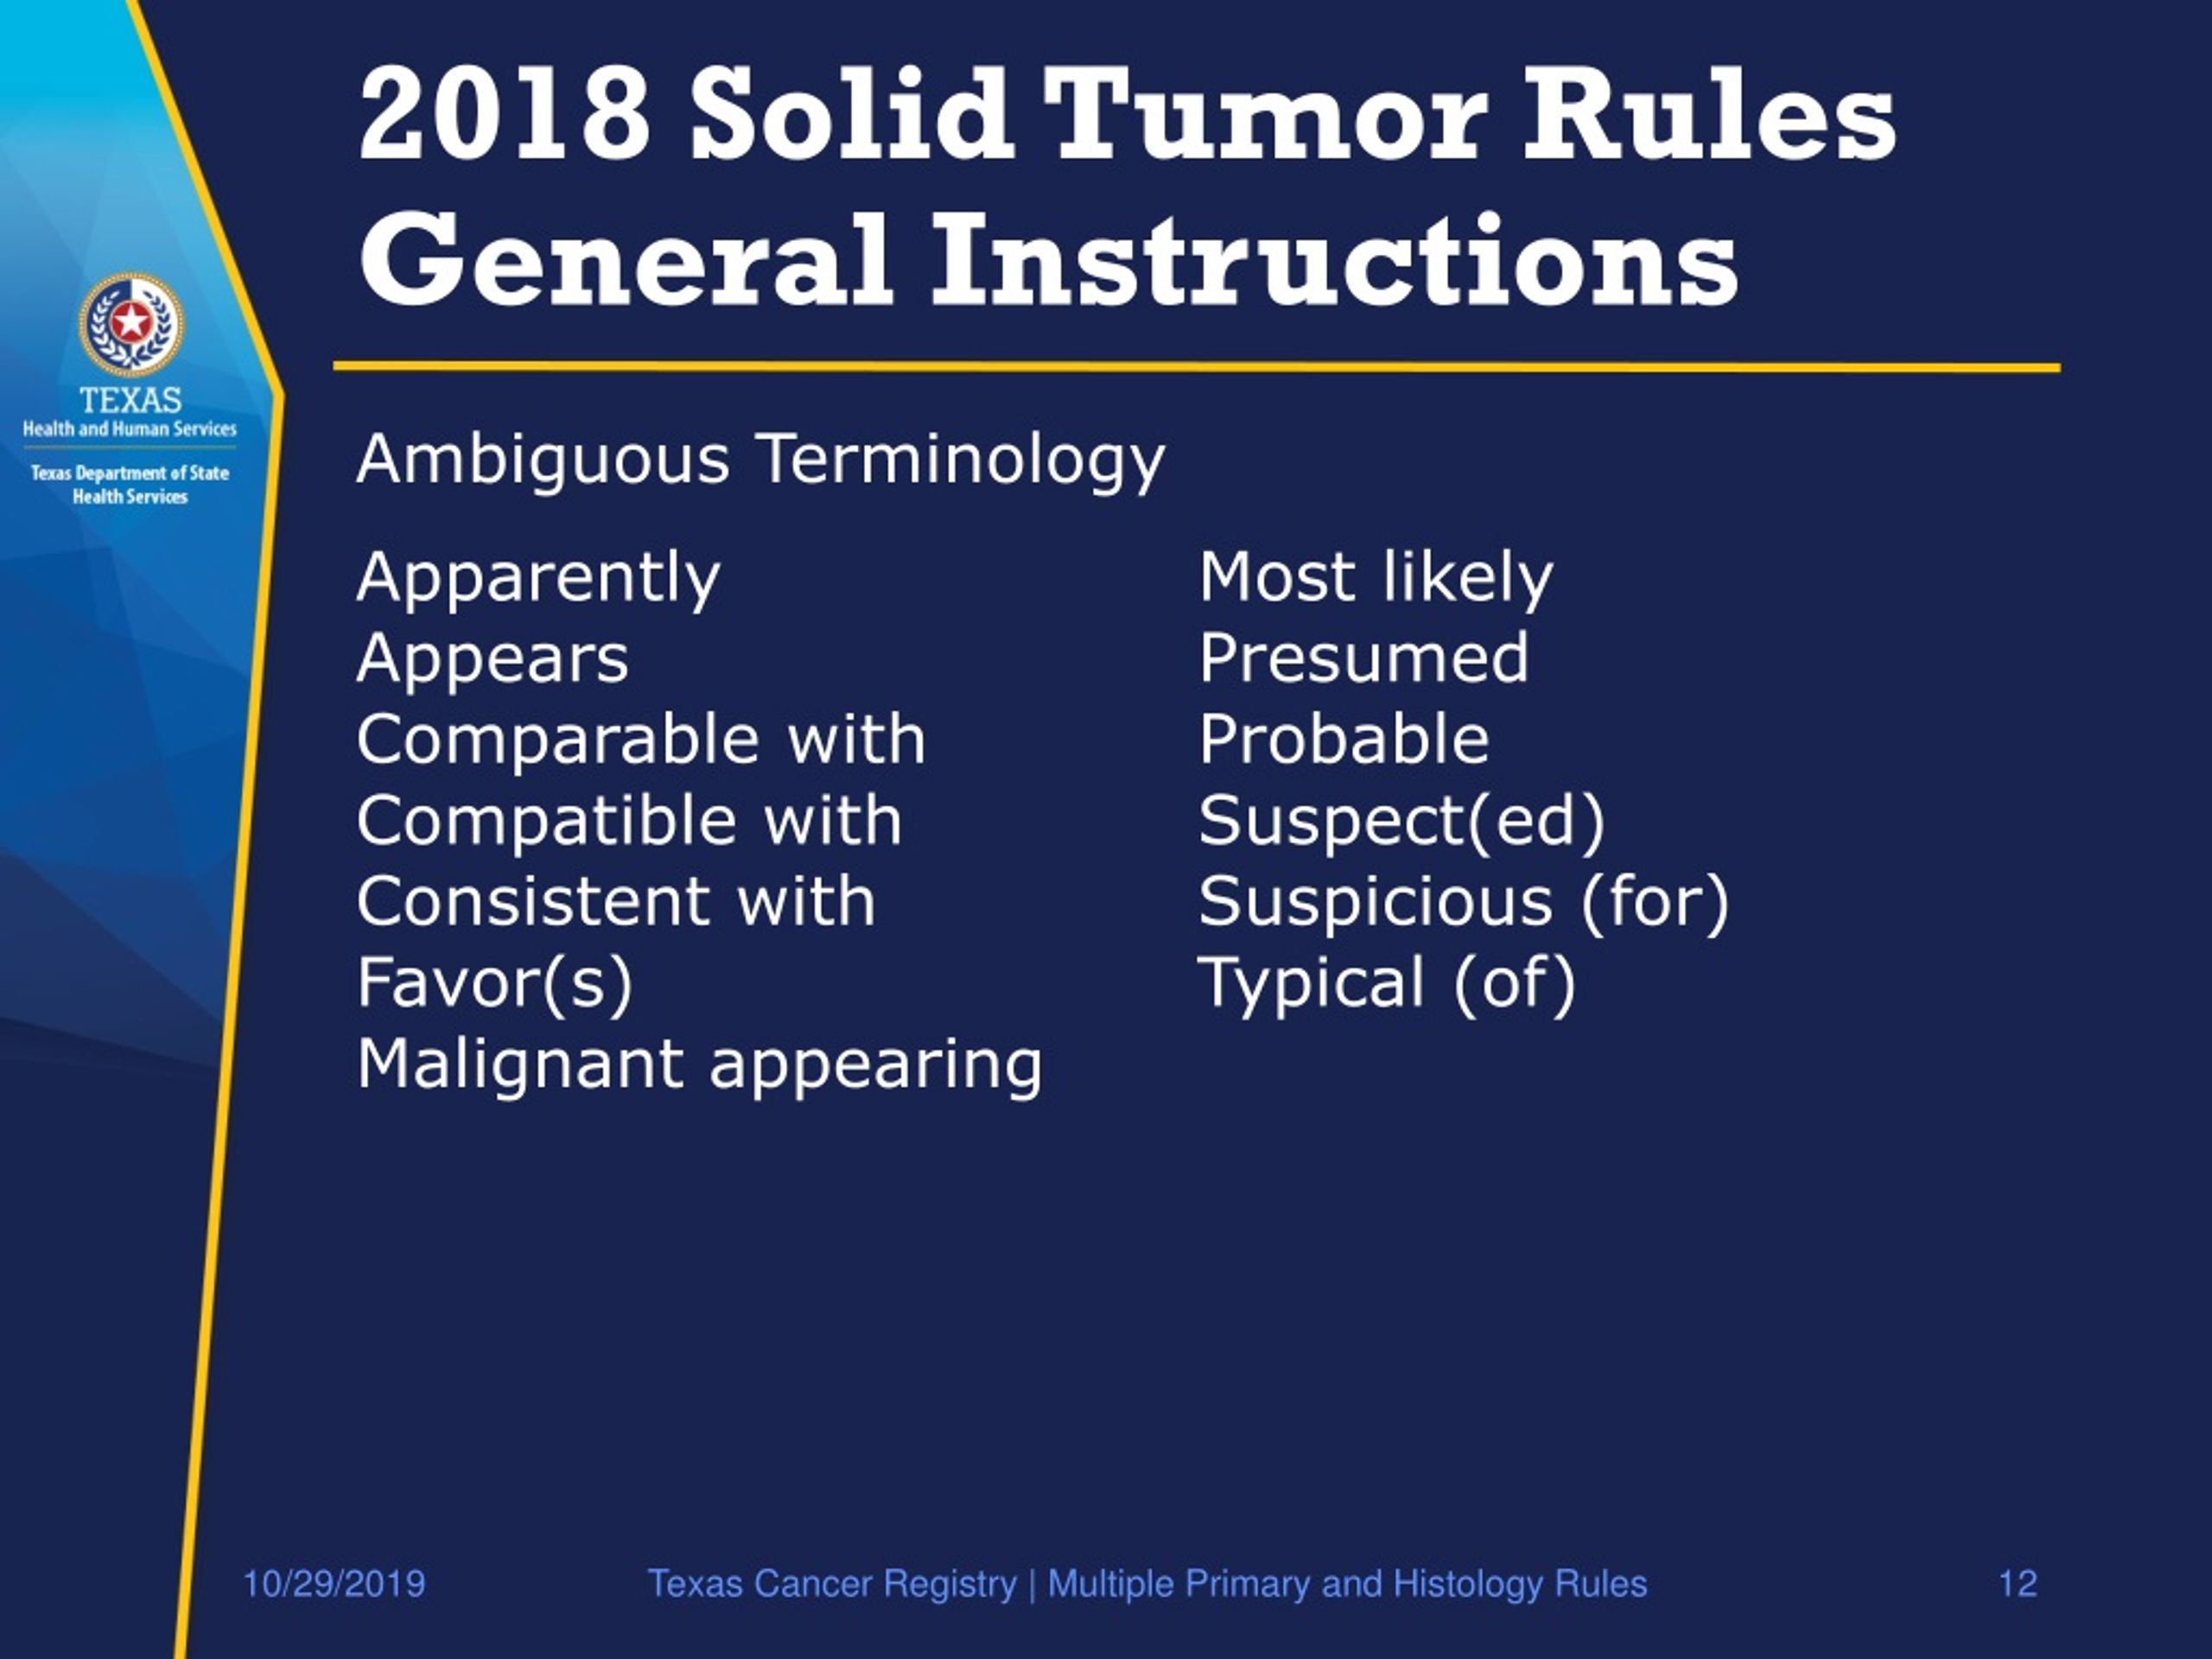 PPT 2018 Solid Tumor Rules PowerPoint Presentation, free download